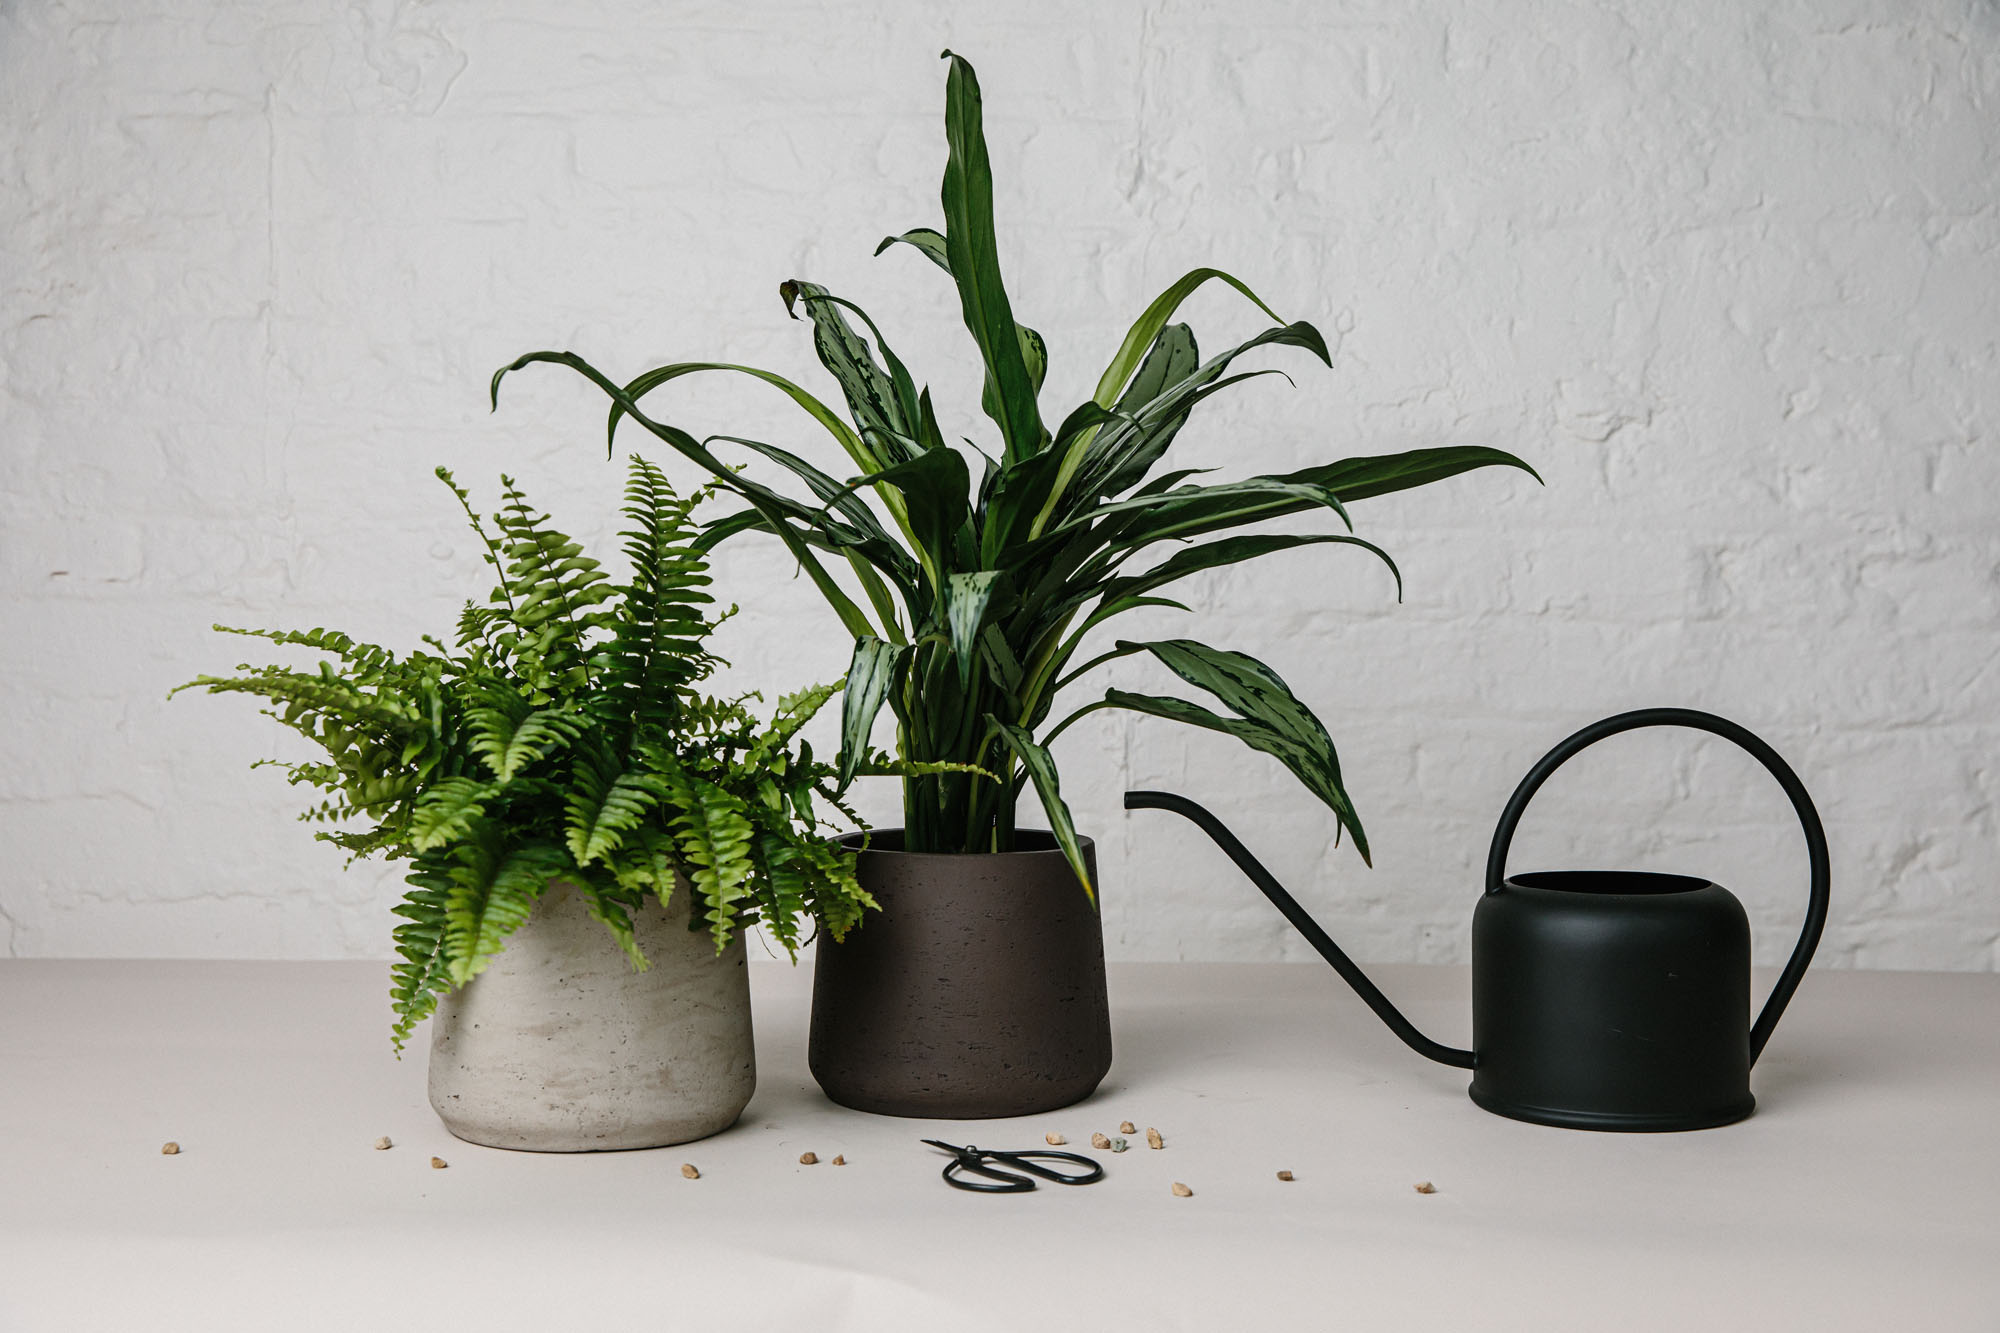 plants in pots next to scissors and watering can